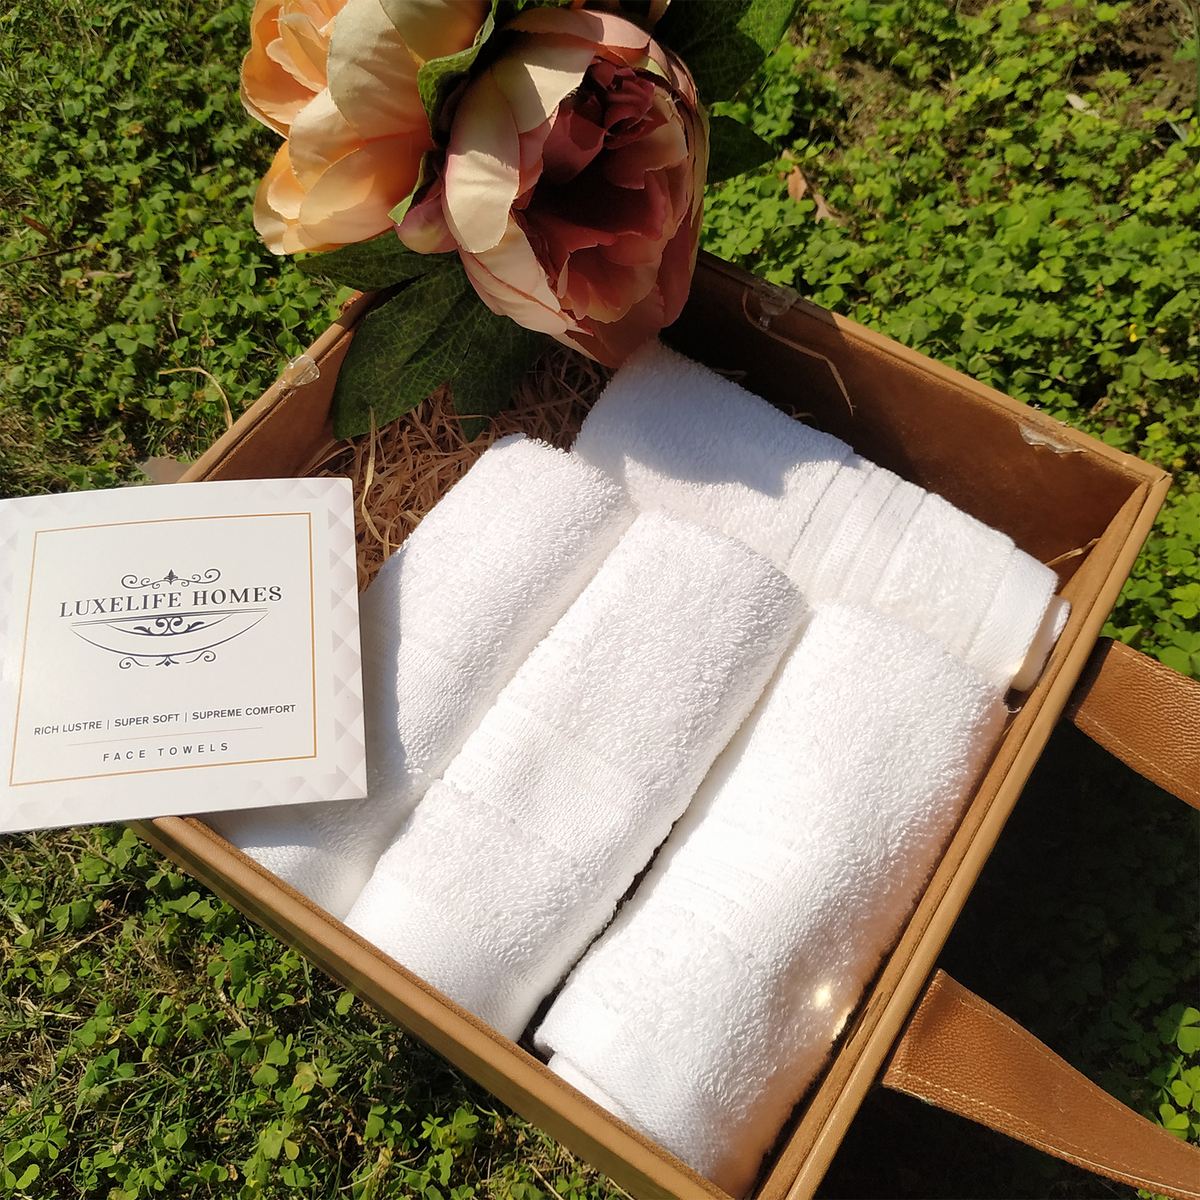 The Luxelife White Plain Face Towel